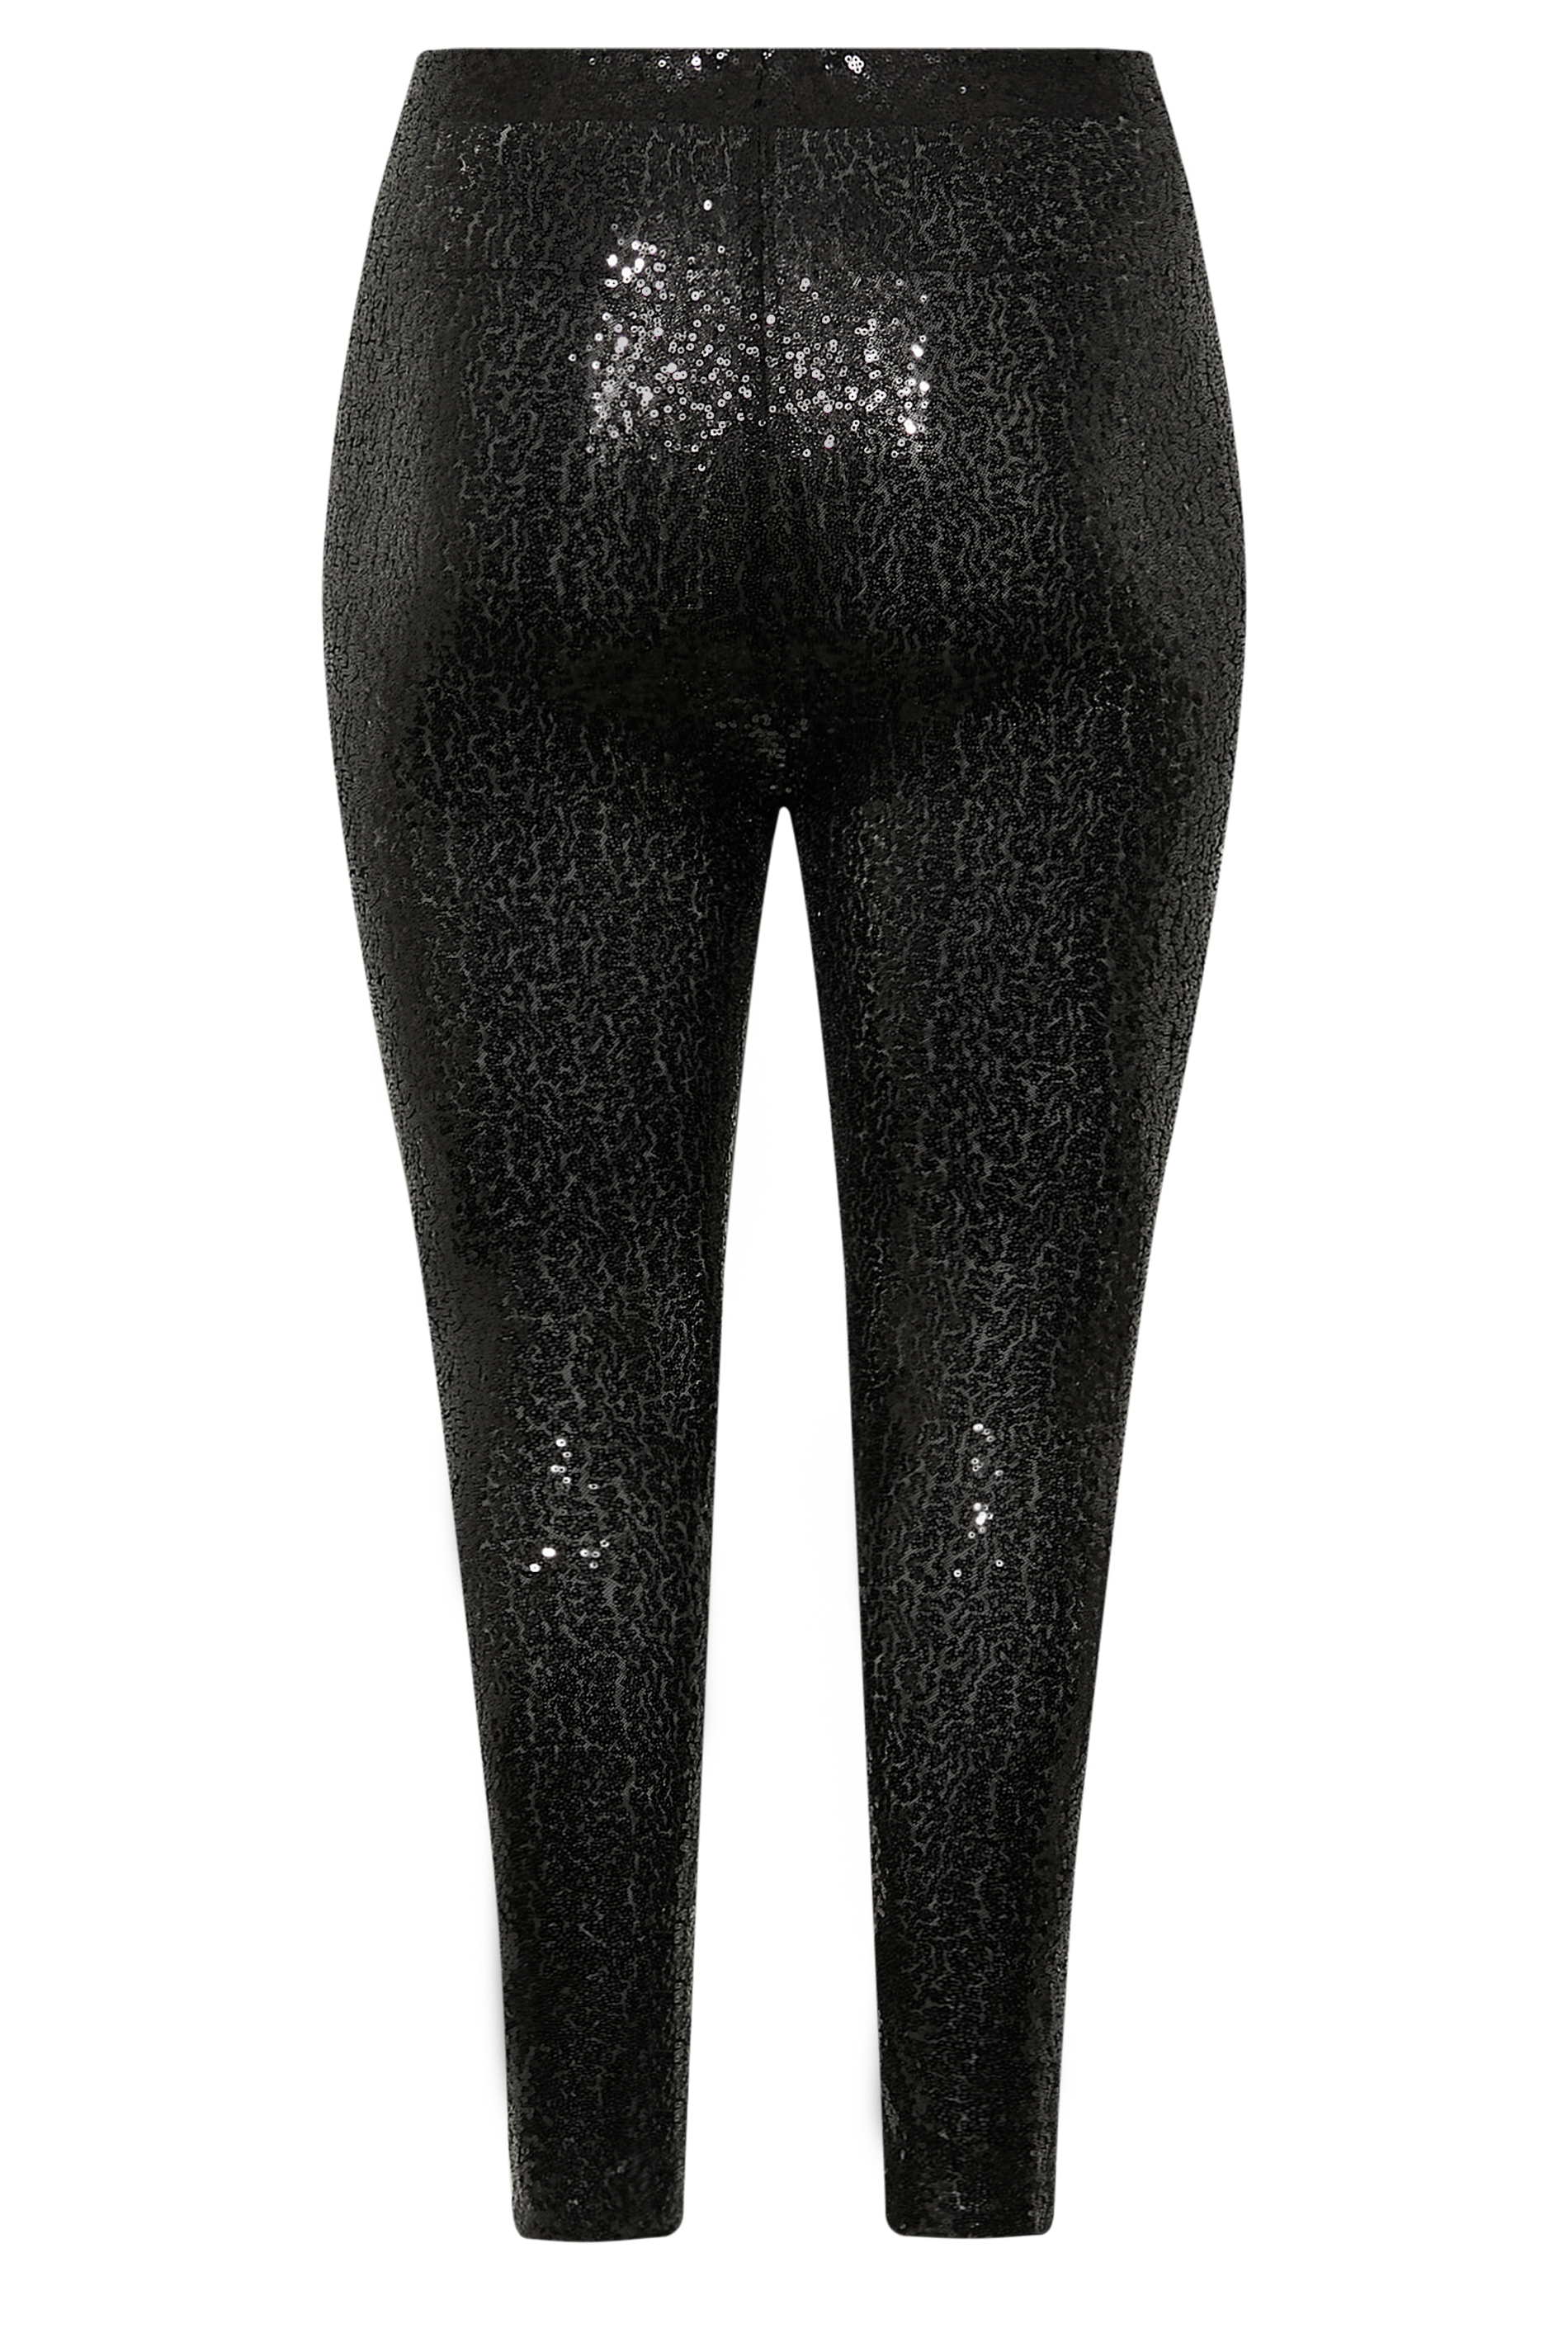 Plus Size Black Sequin Stretch Leggings | Yours Clothing